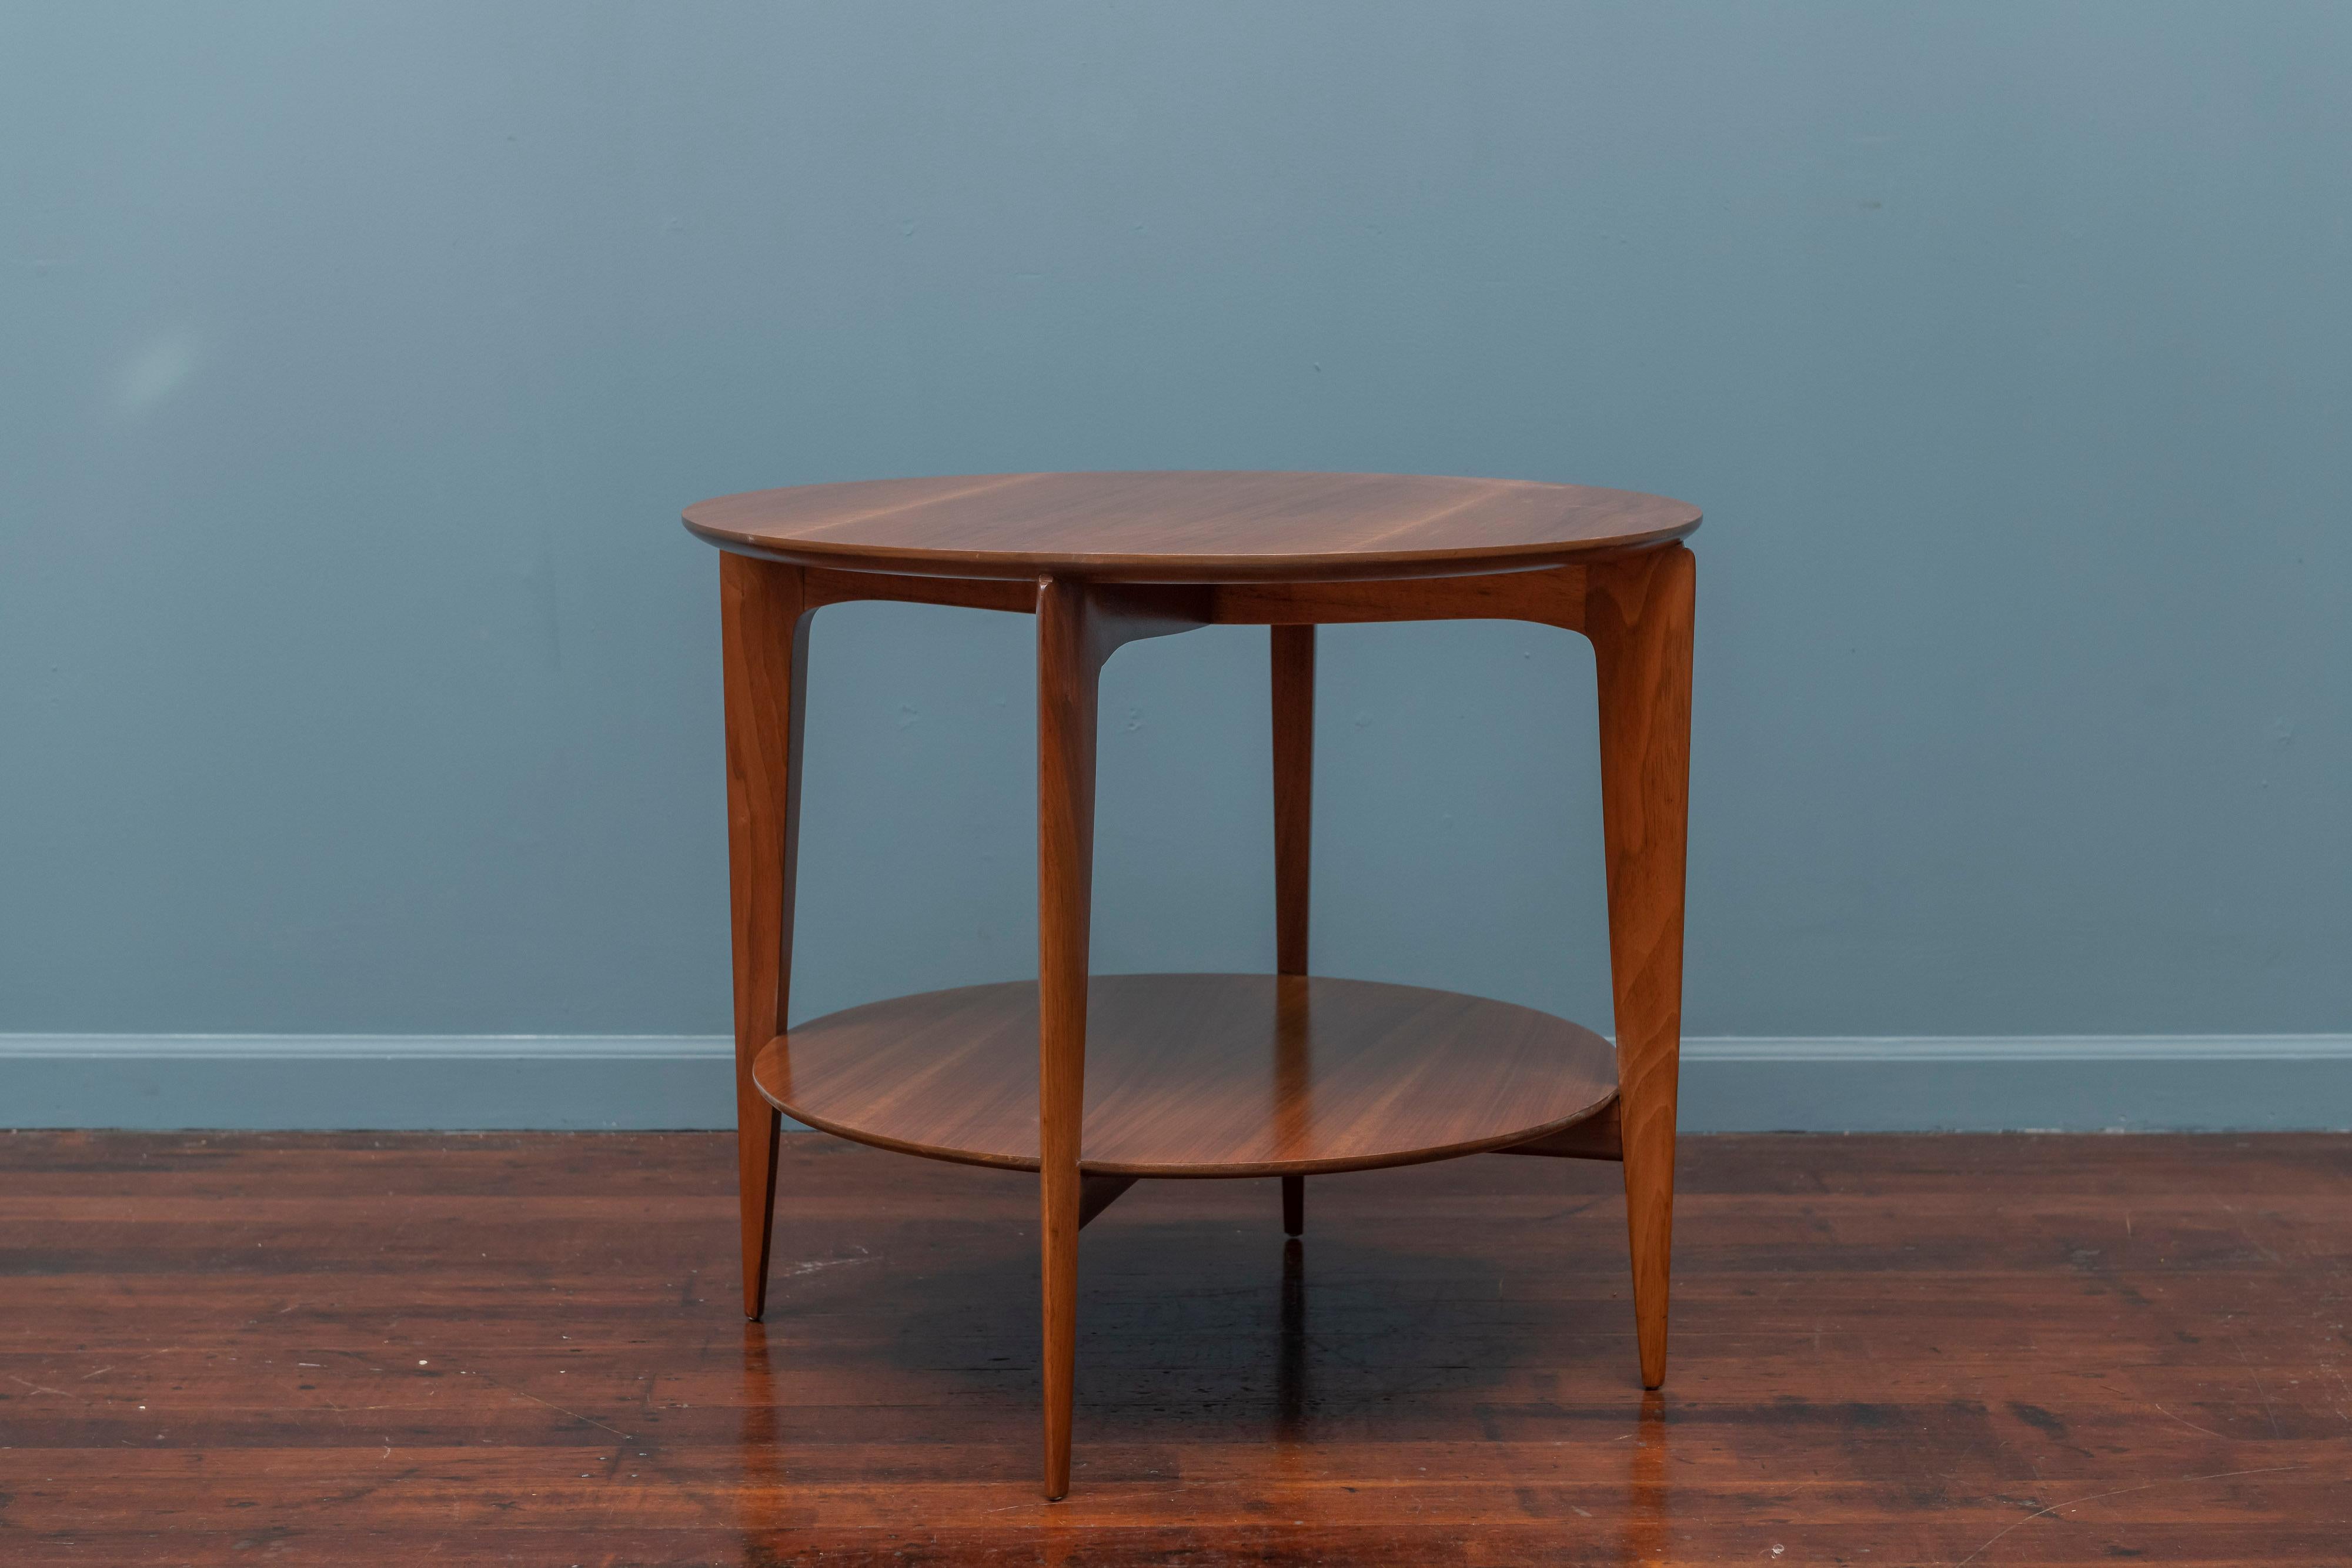 Gio Ponti design occasional table for Singer & Son's model 2136. High quality construction and design, the original finish has been cleaned and waxed retaining the warm rich walnut color.